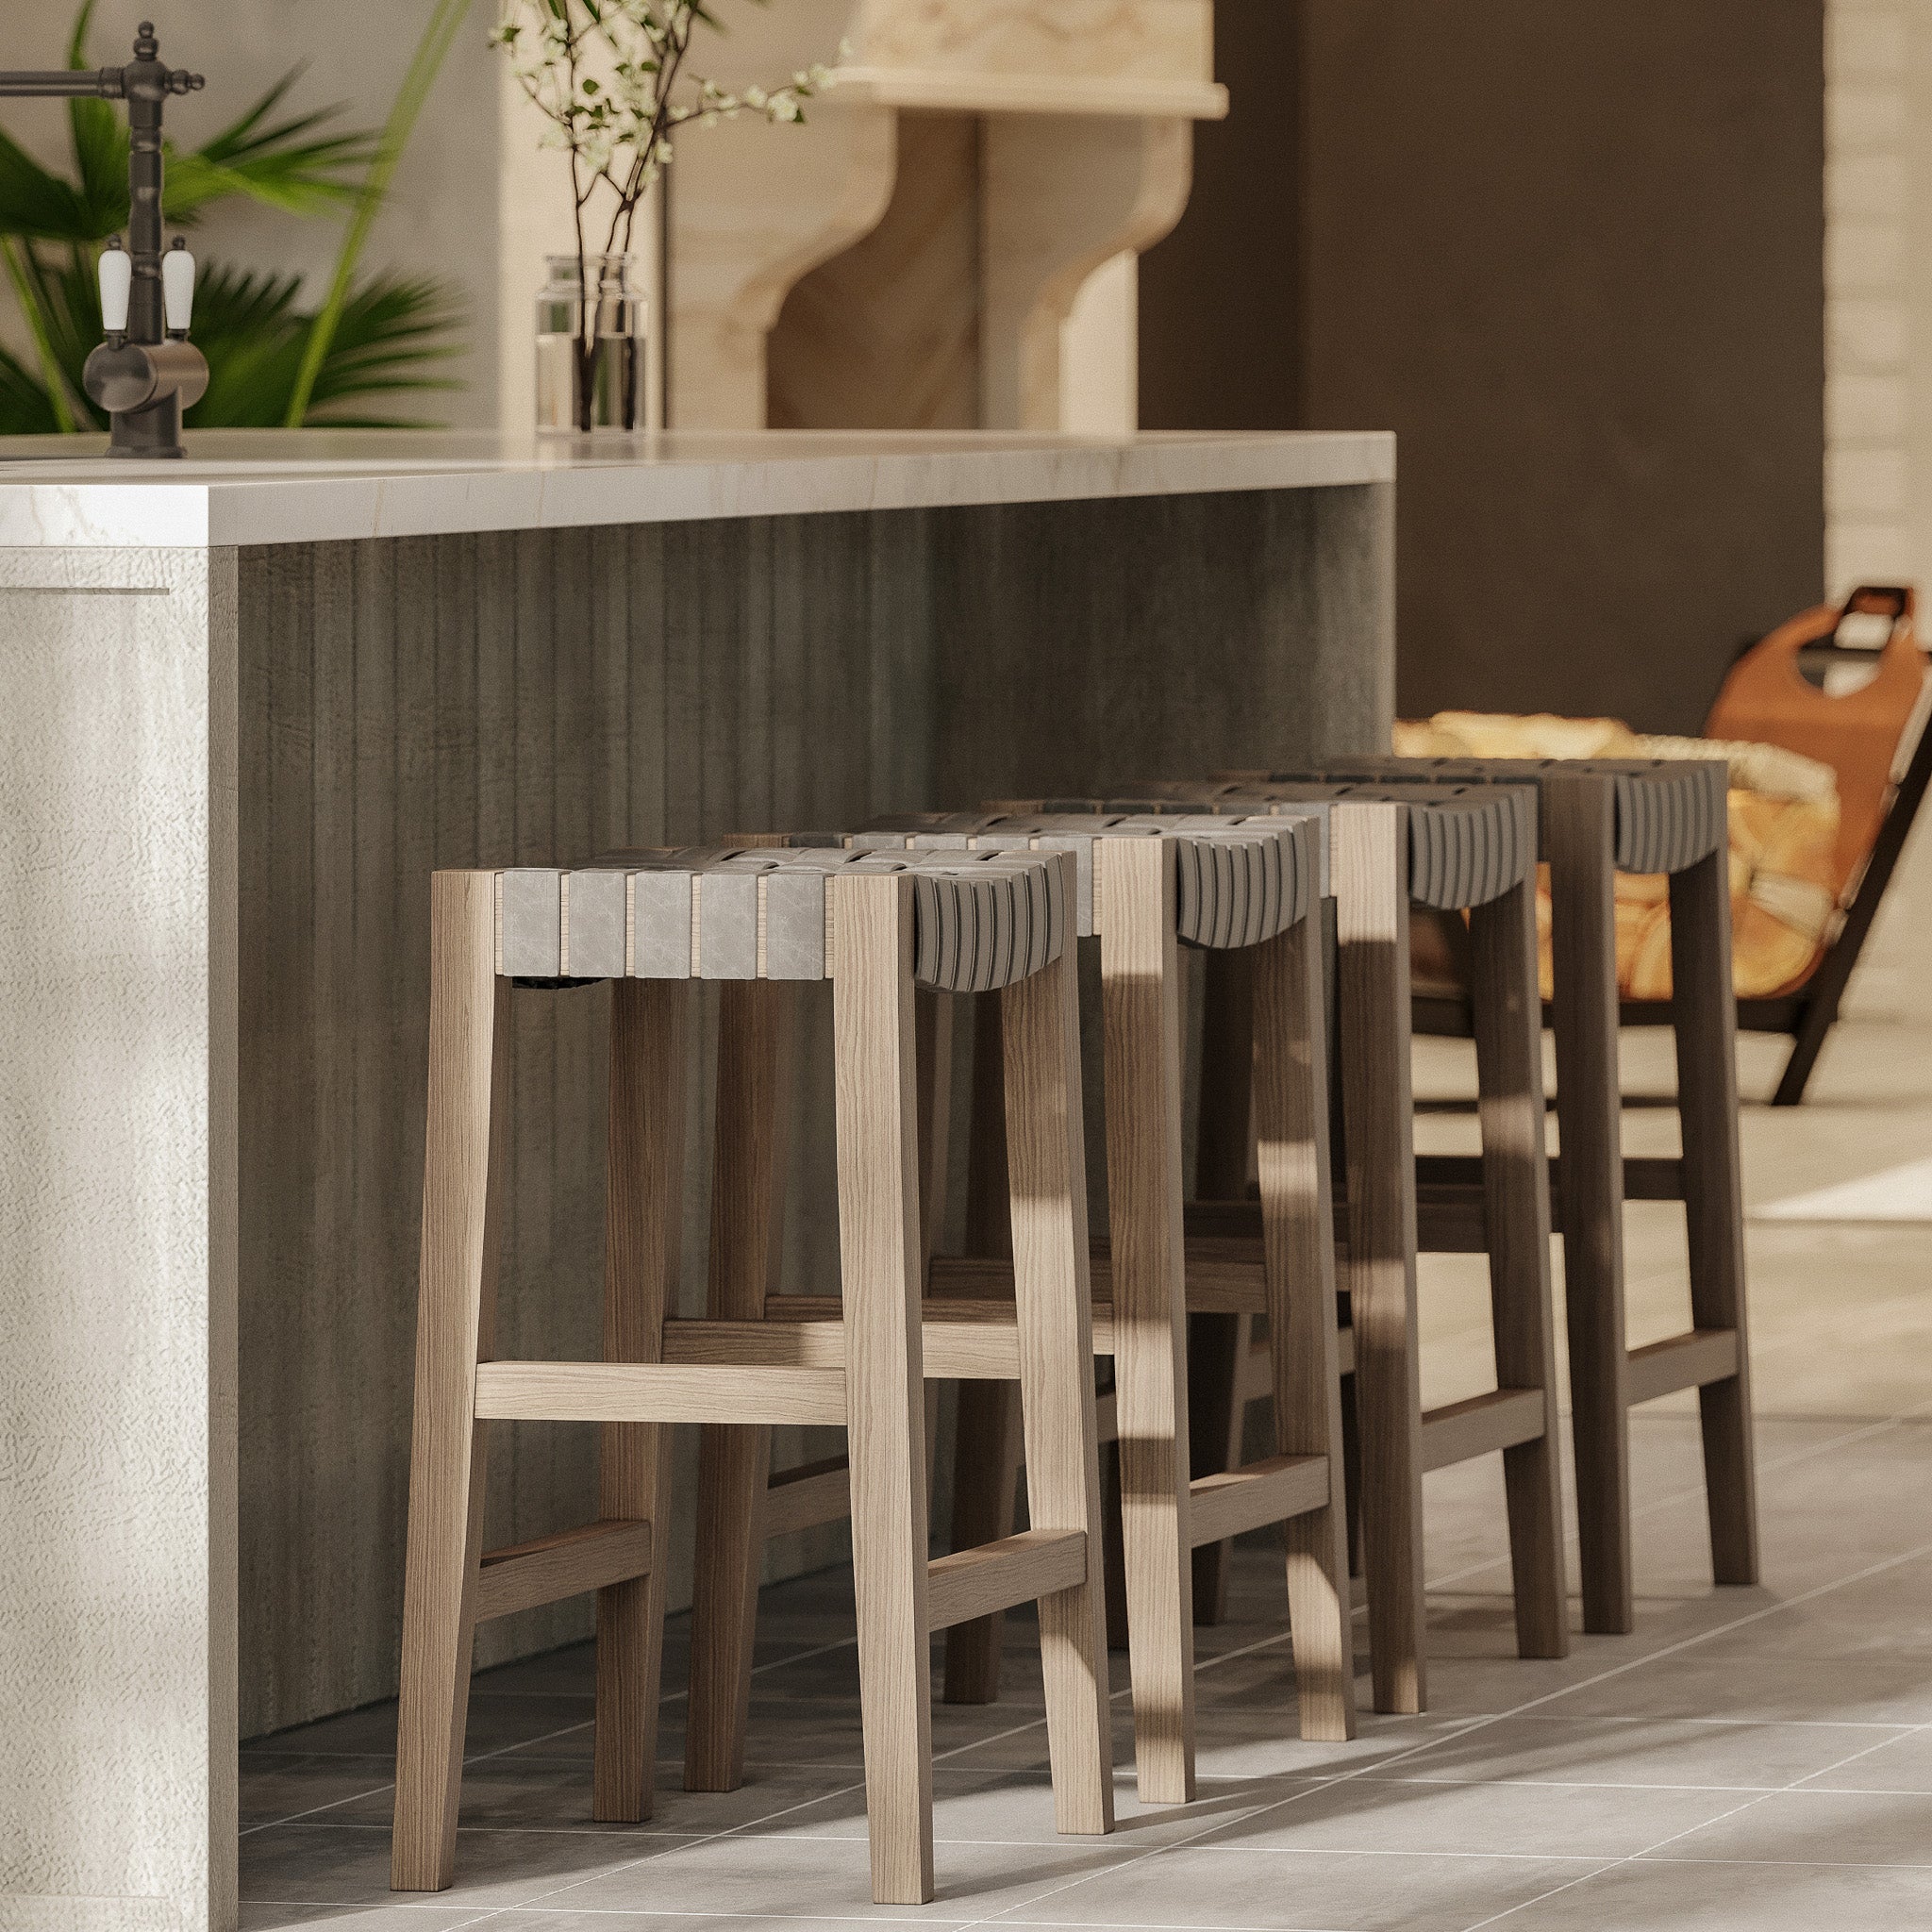 Emerson Counter Stool in Weathered Grey Wood Finish with Ronan Stone Vegan Leather in Stools by Maven Lane